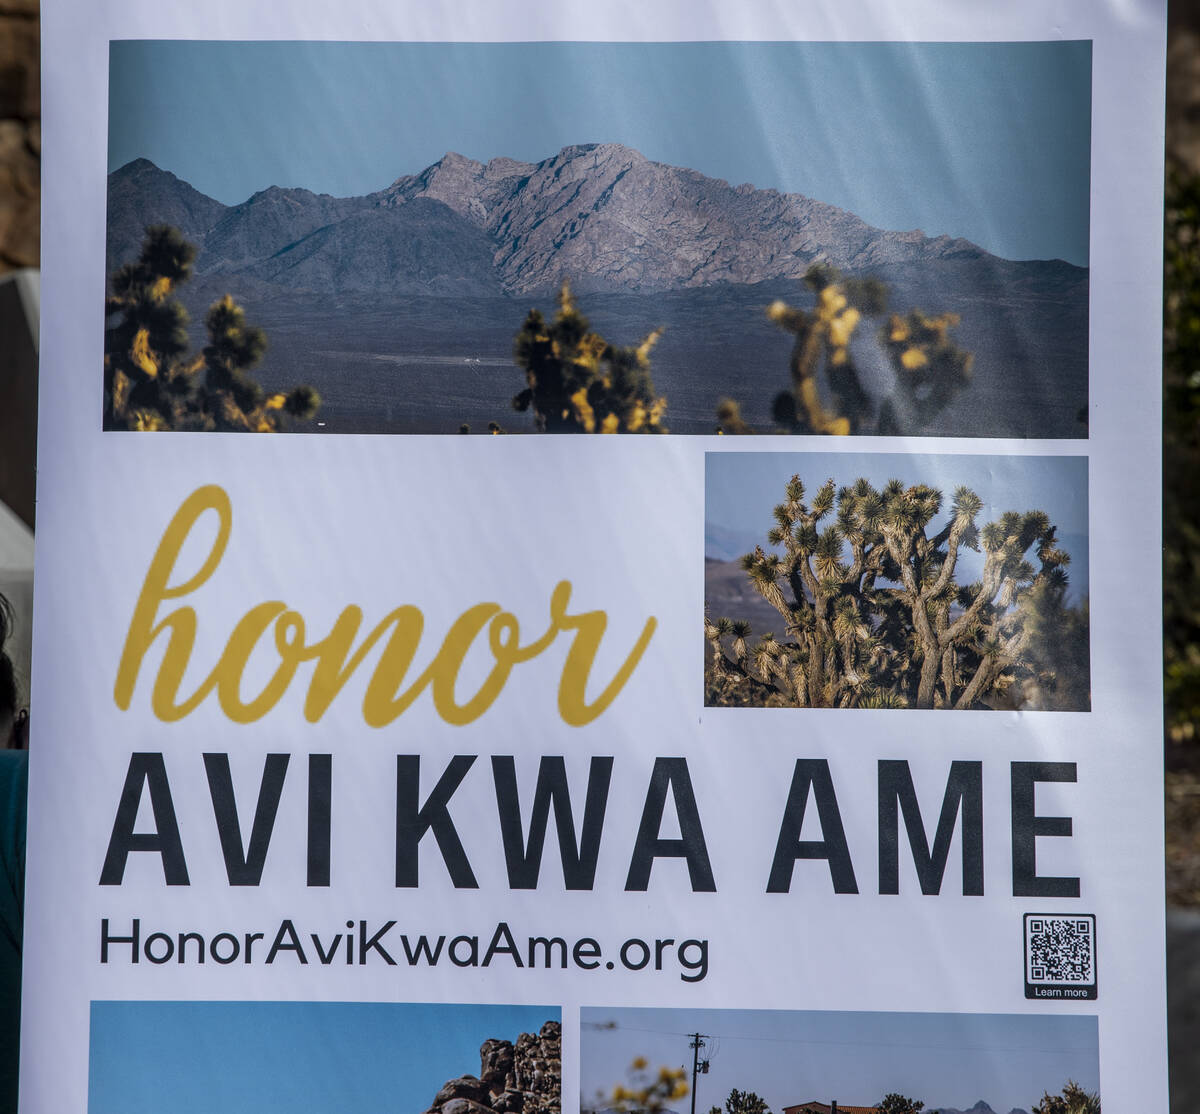 Placard on display during a press conference for the bill to designate Avi Kwa Ame (the Mojave ...